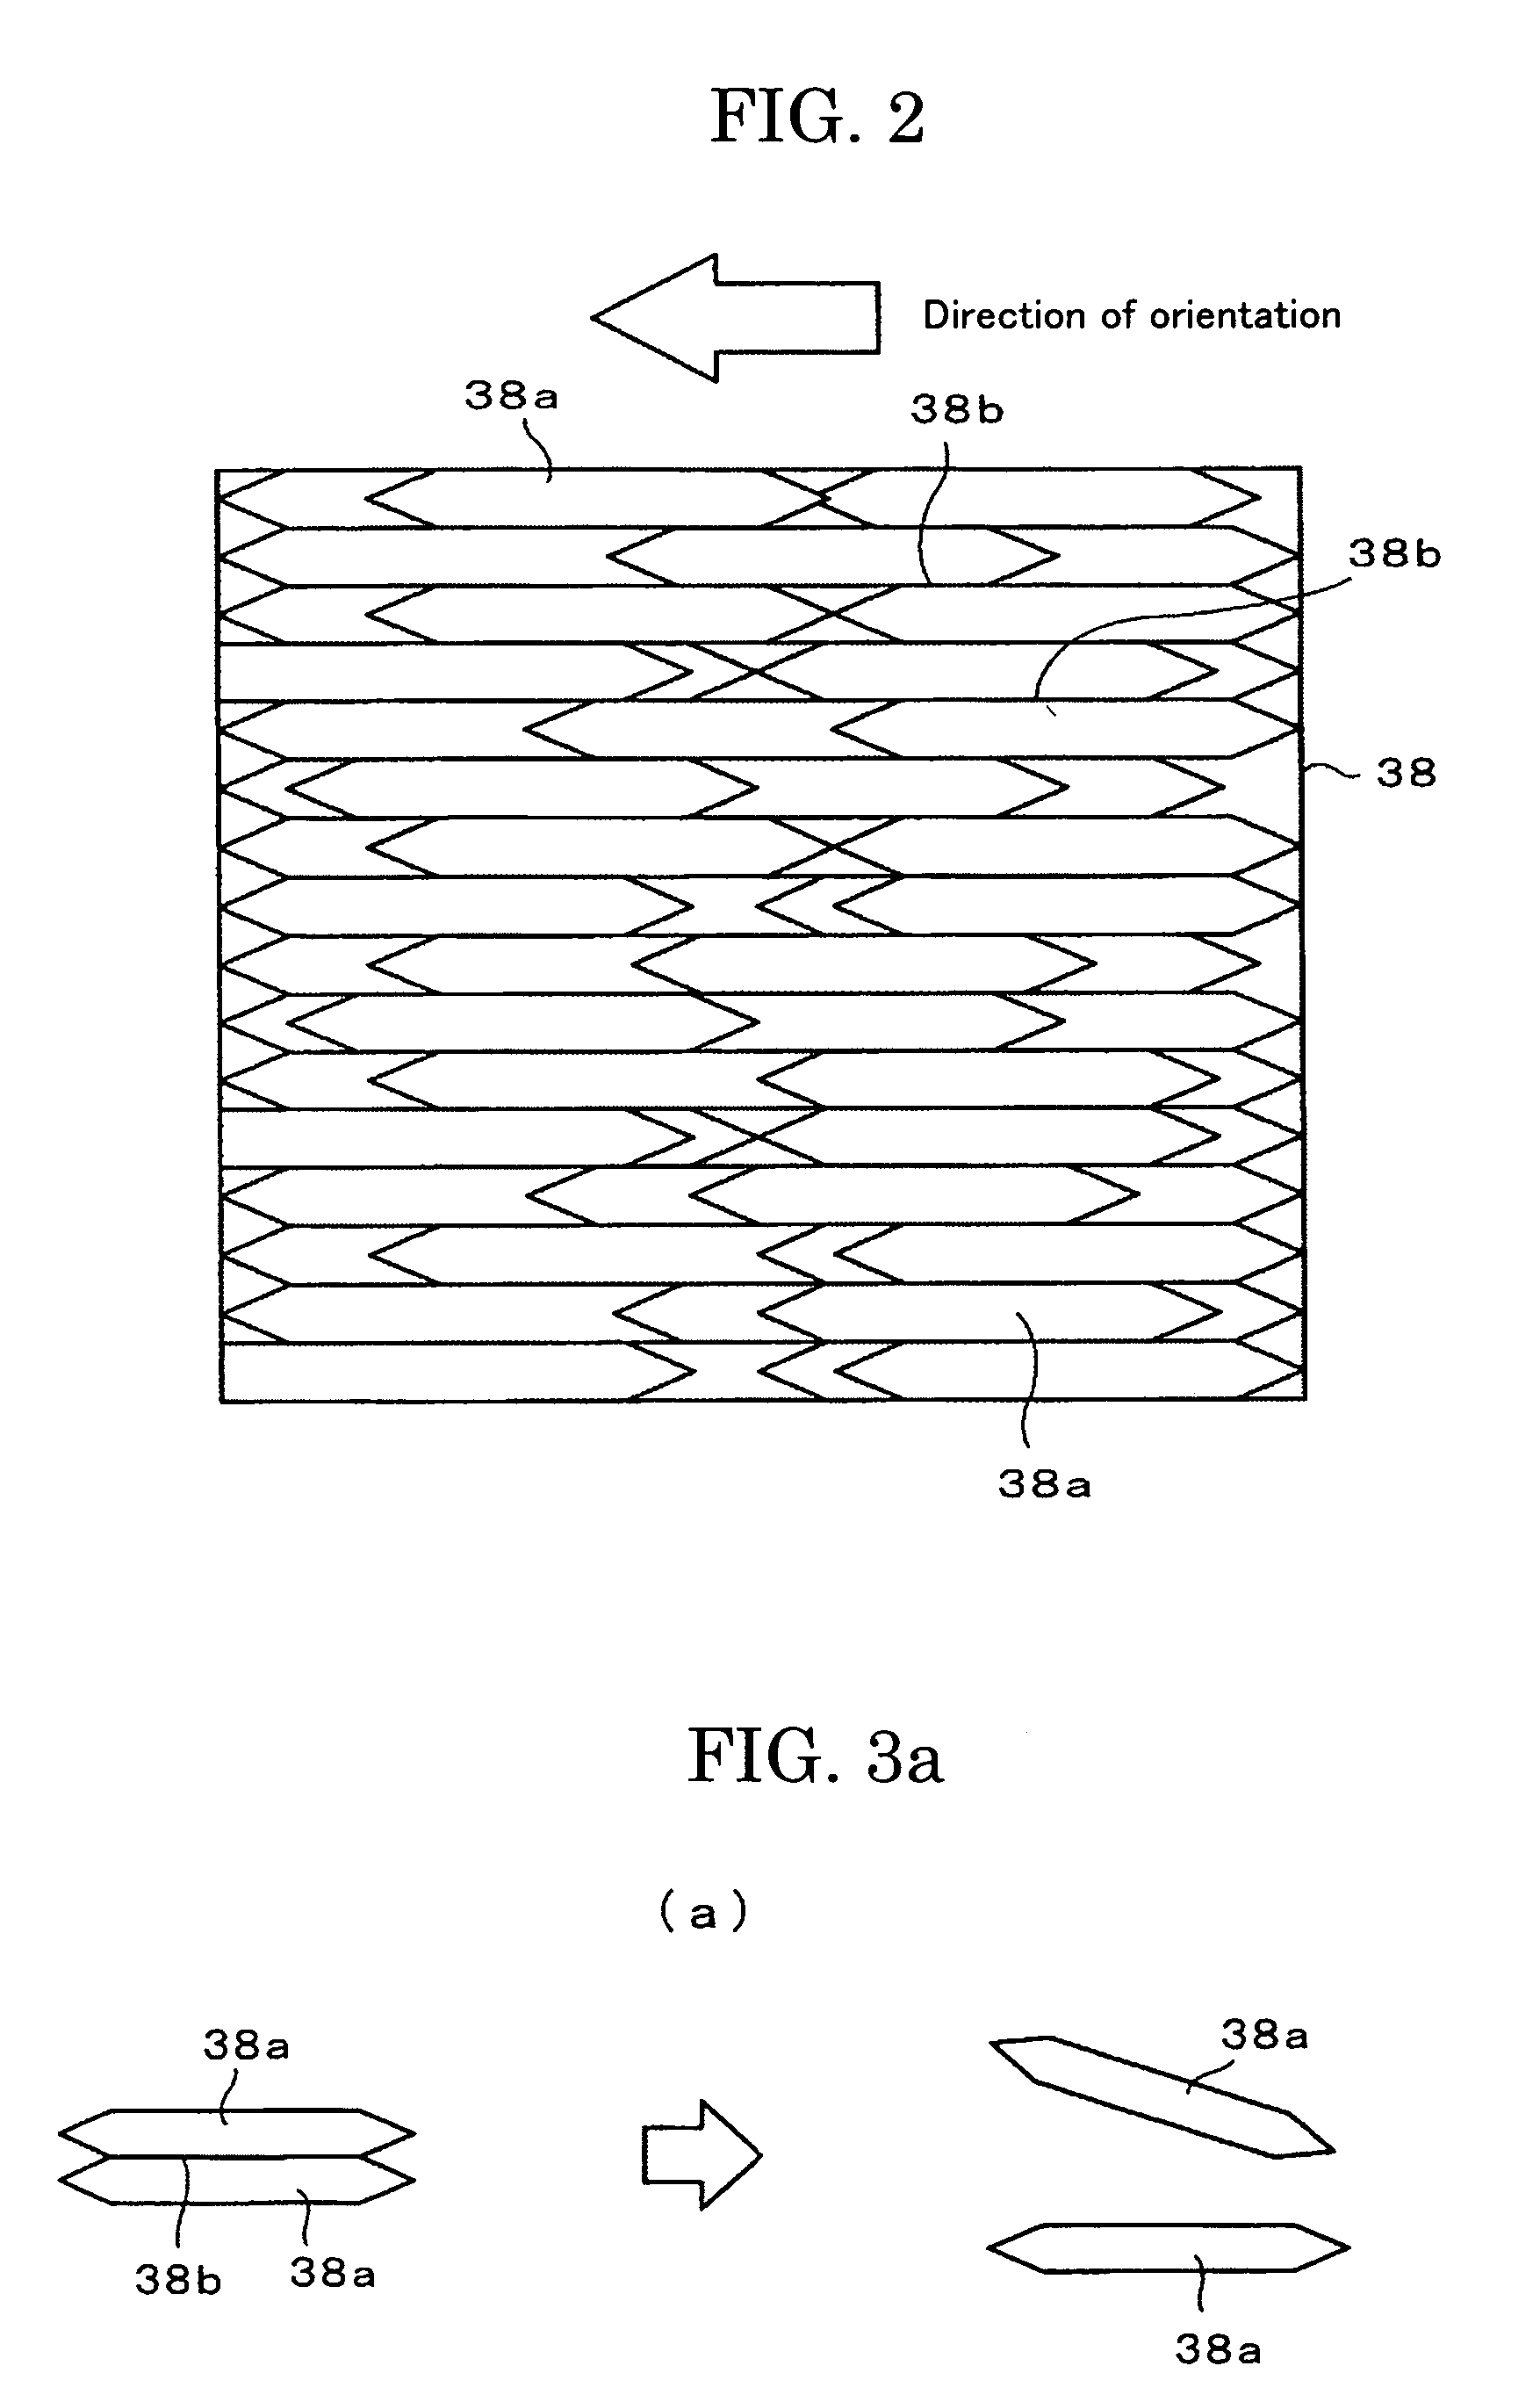 Image-bearing member protecting agent, method of applying an image-bearing member protecting agent, protective layer forming device, image forming method, process cartridge, and image forming apparatus